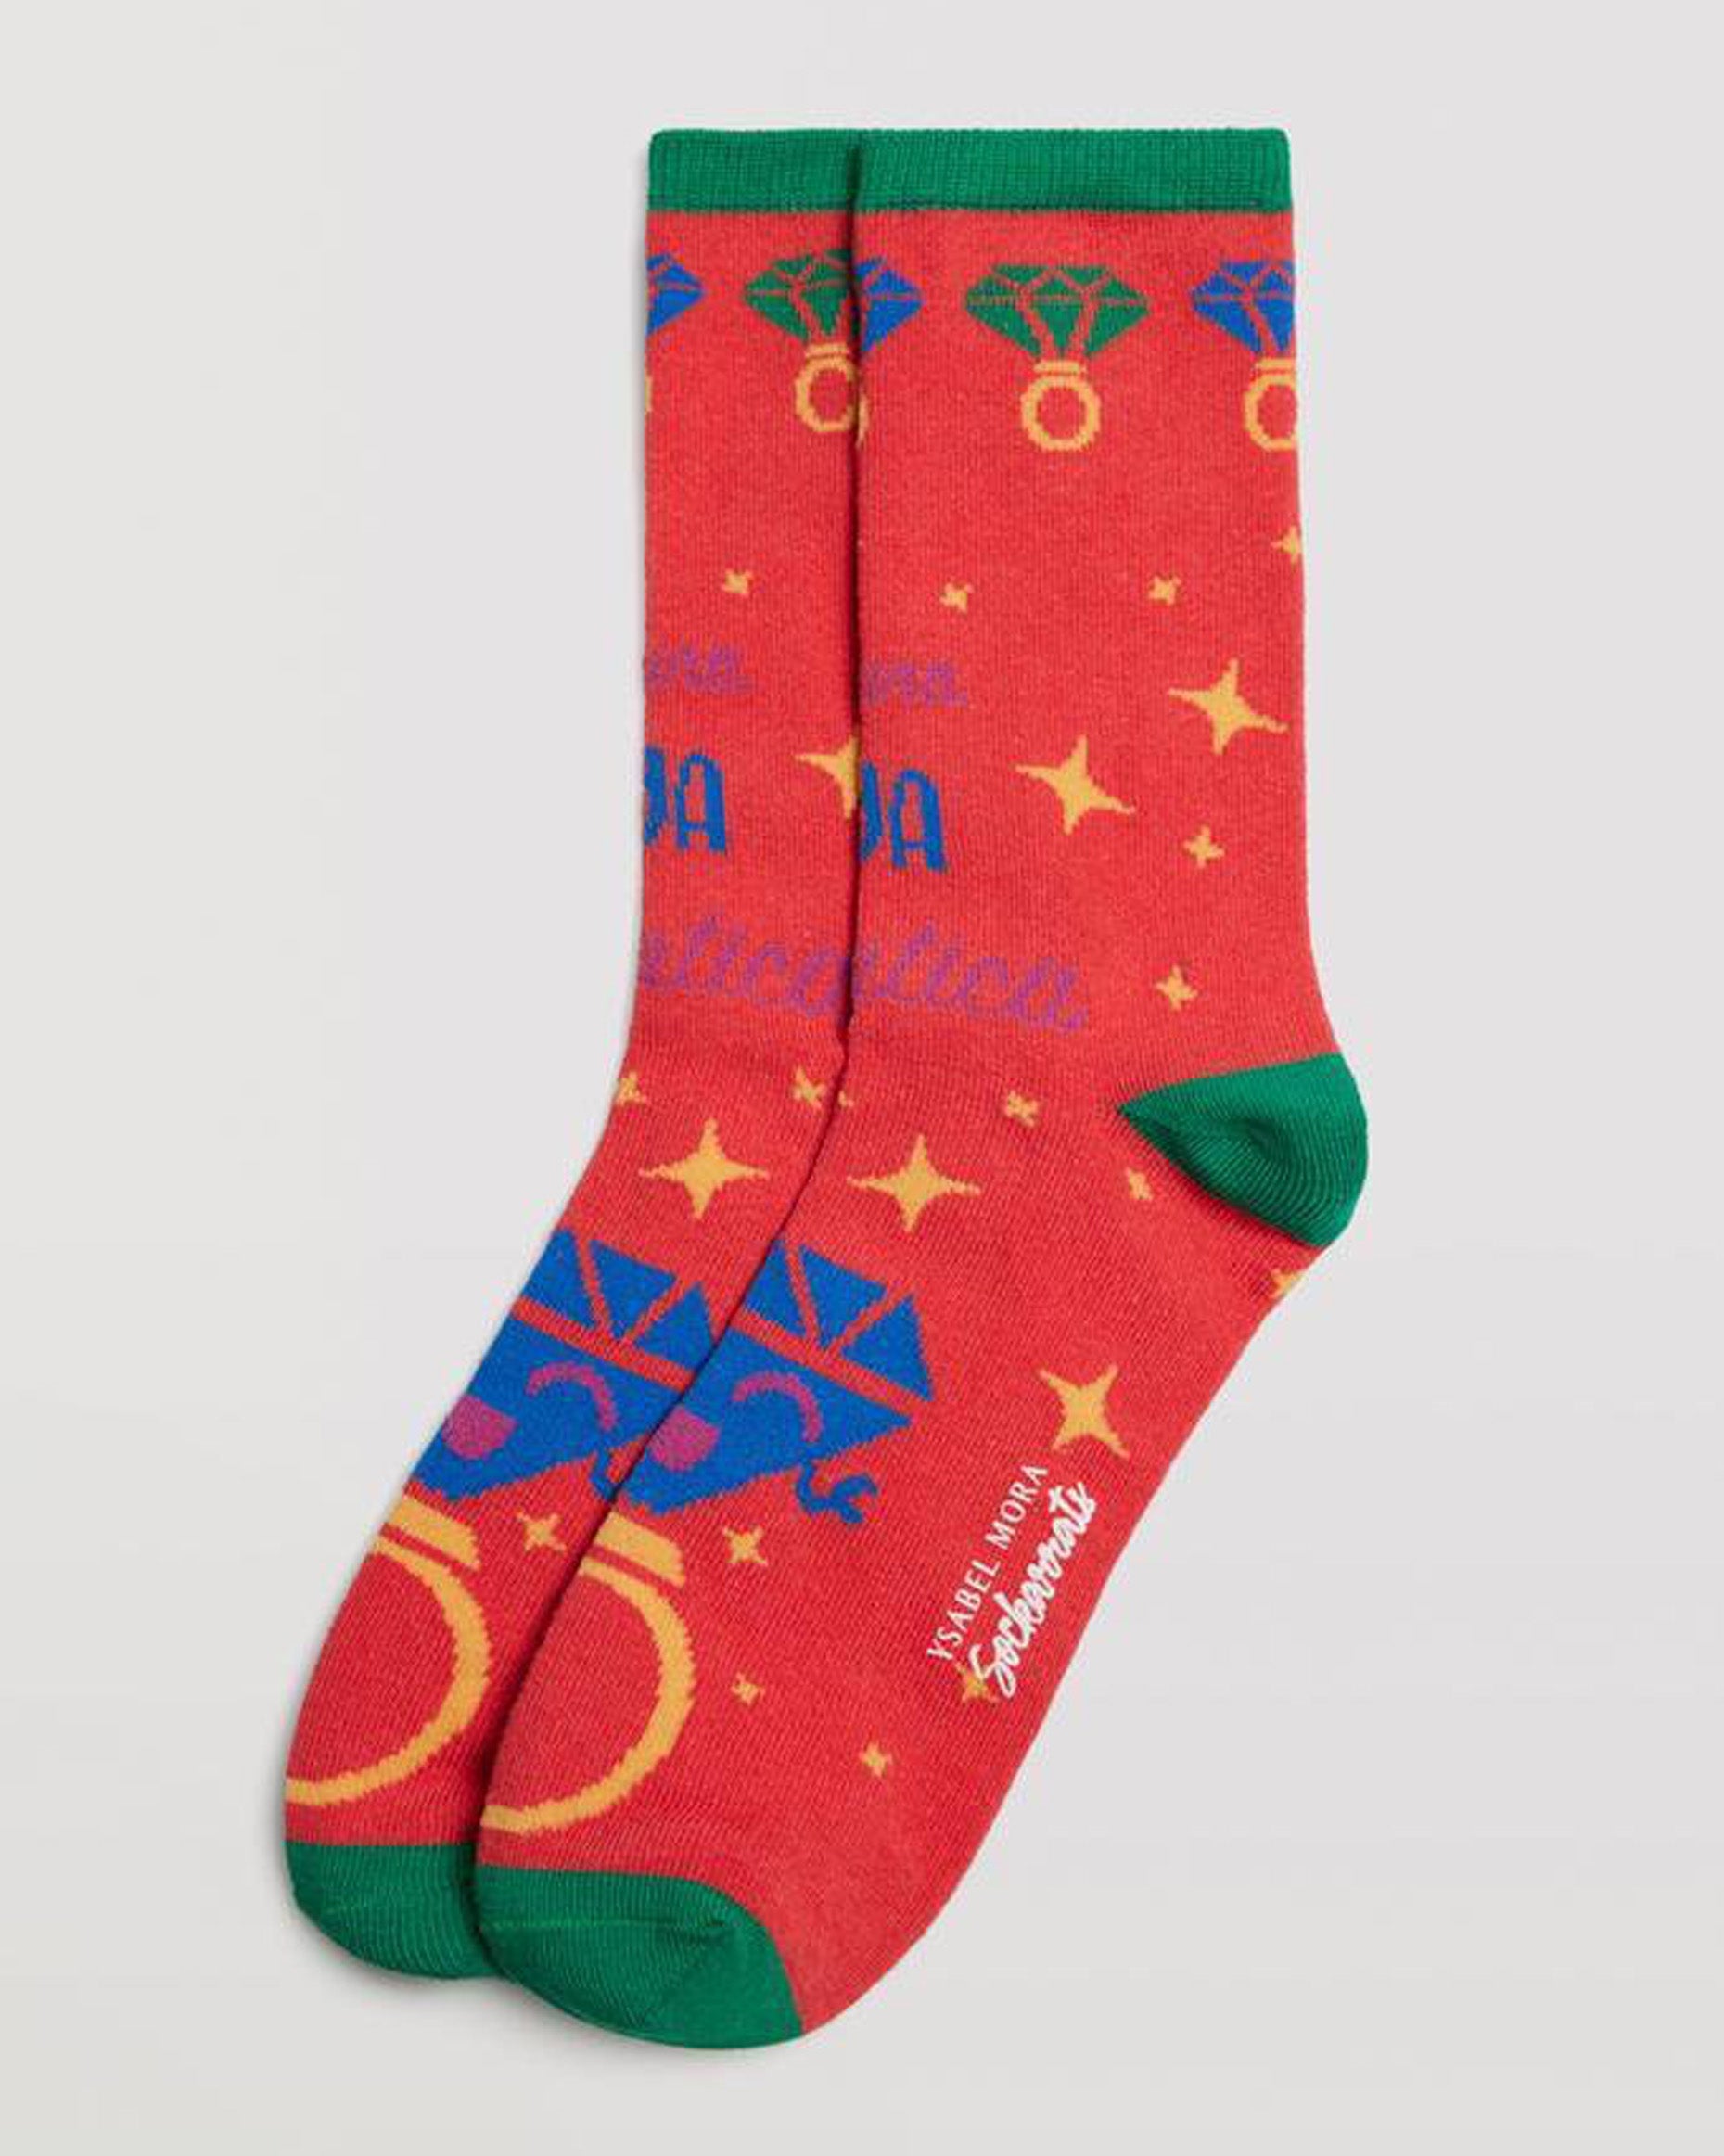 Ysabel Mora 12906 Diamond Ring Socks - Bright red cotton crew length socks with a multicoloured diamond ring pattern around the cuff, smiling diamond ring motif on the foot and stars, green cuff, toe and heel. 